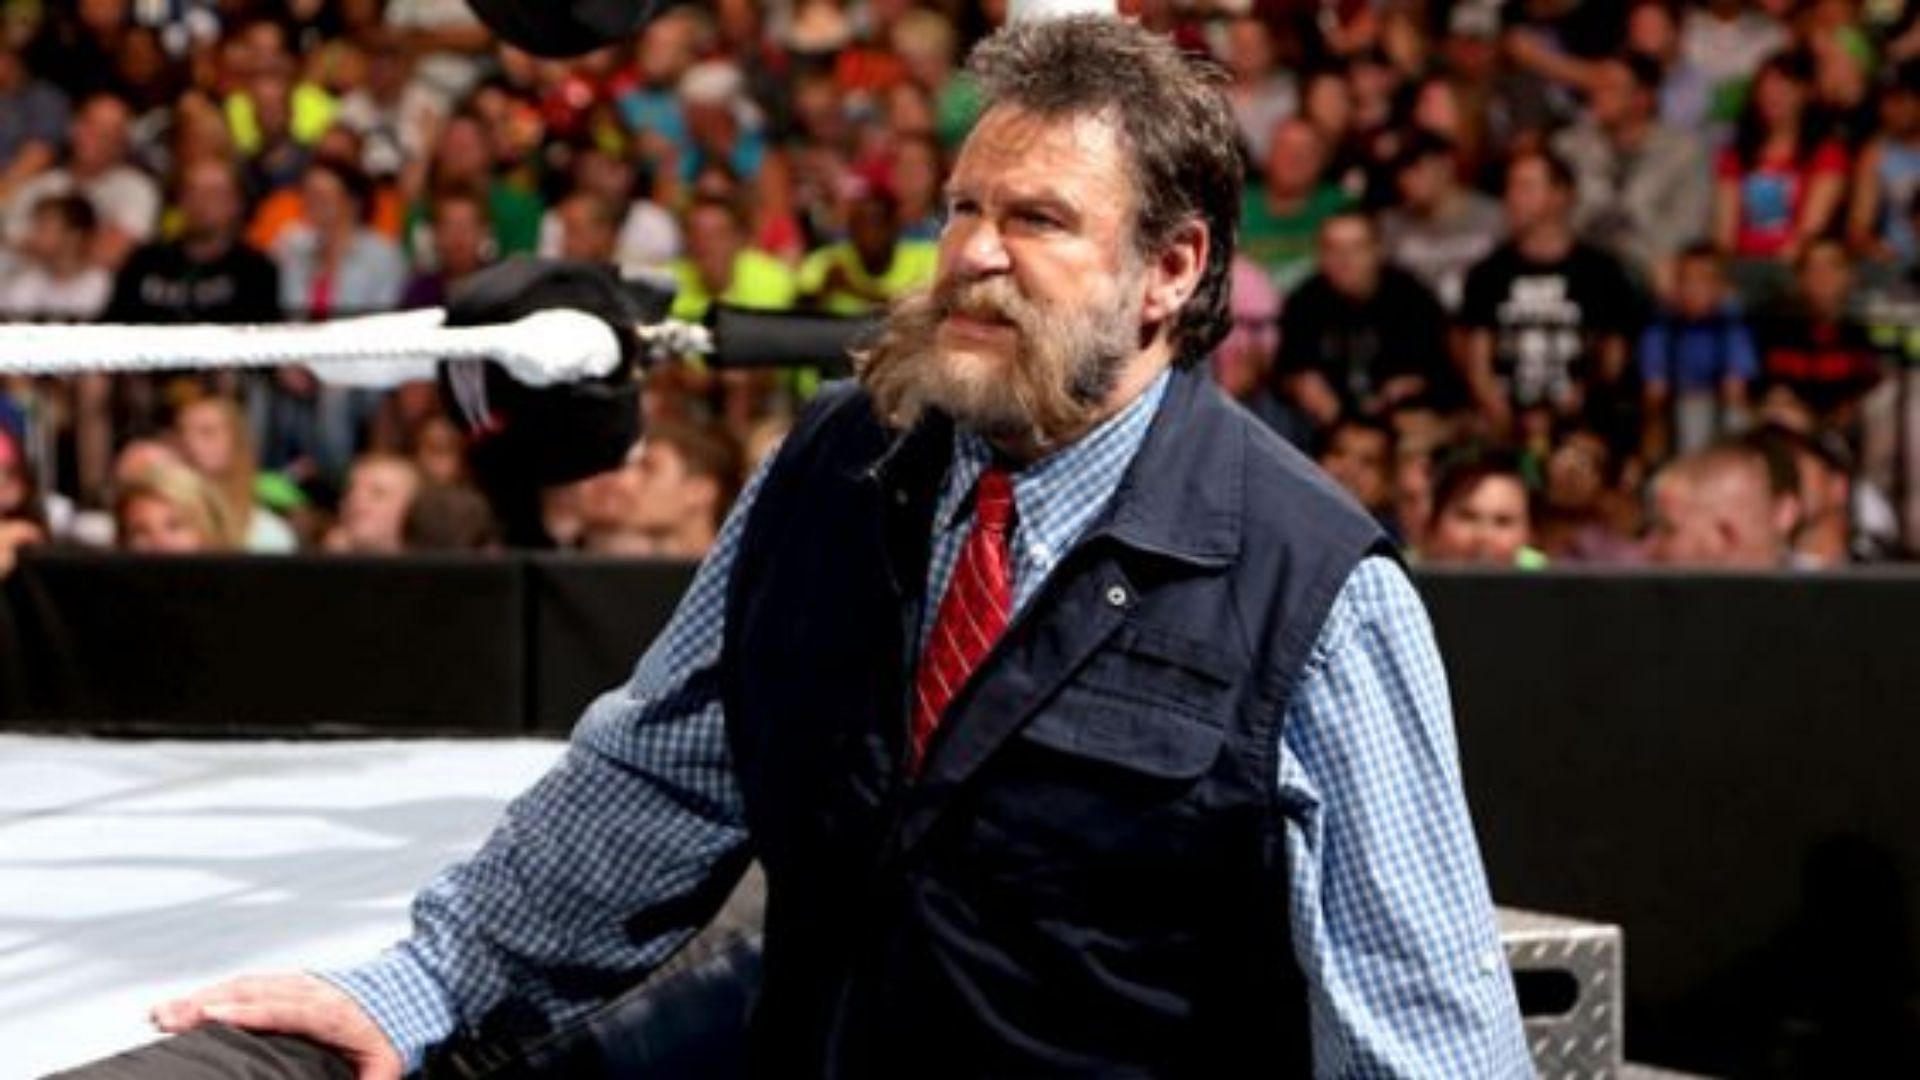 Dutch Mantell was known as Zeb Colter in WWE.